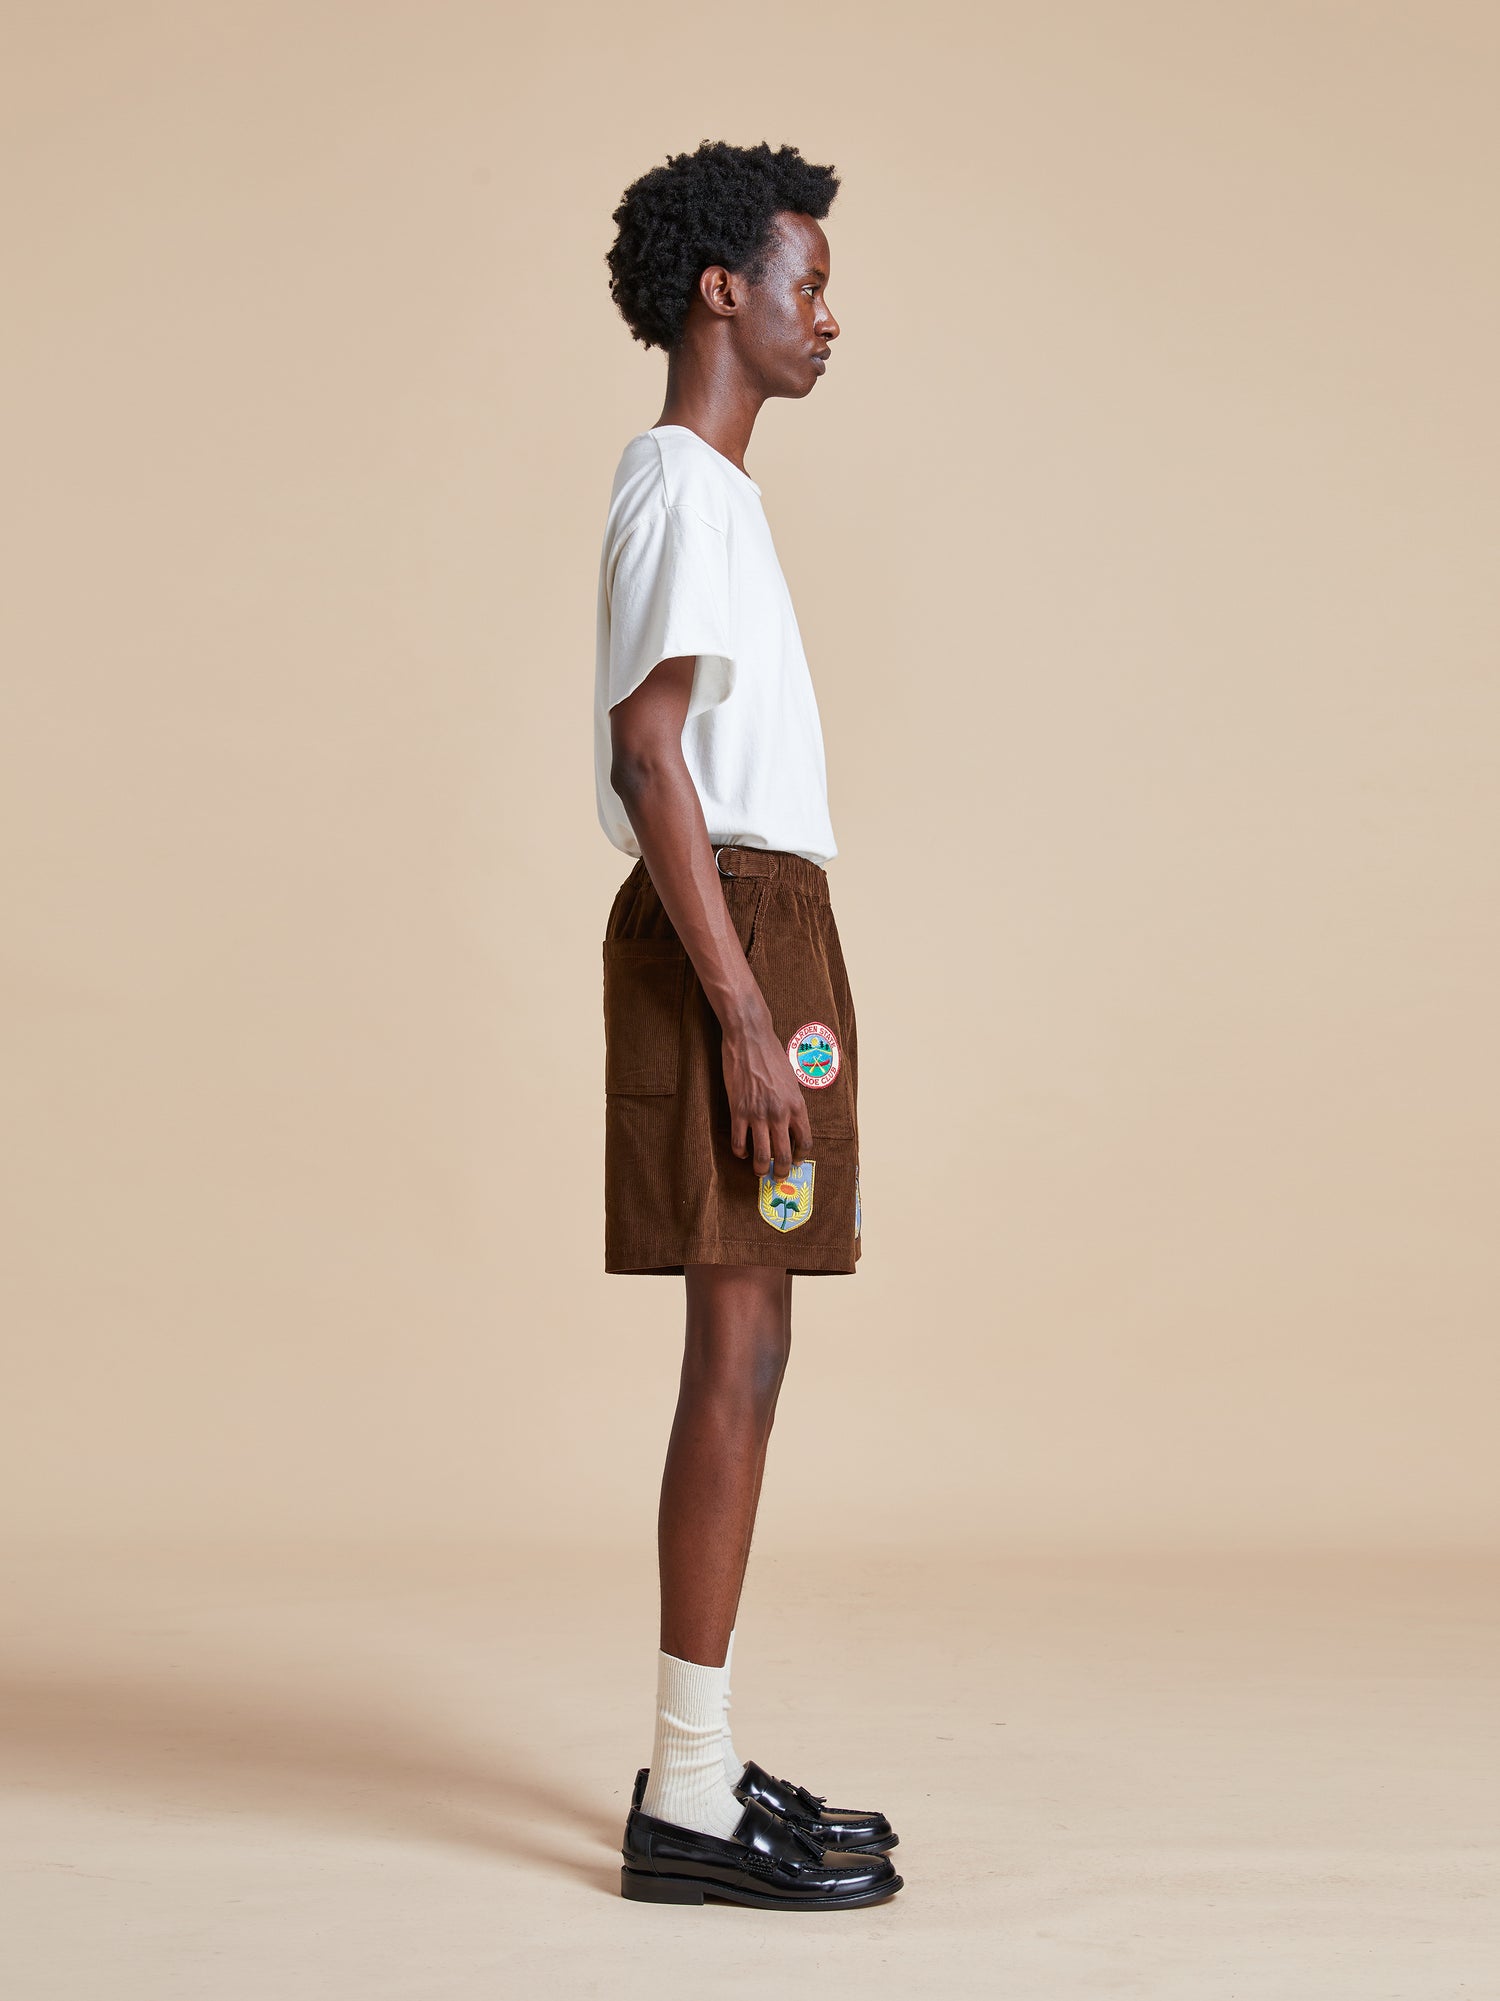 The model is wearing a white t - shirt and Found's Canoe Multi Patch Corduroy Shorts.